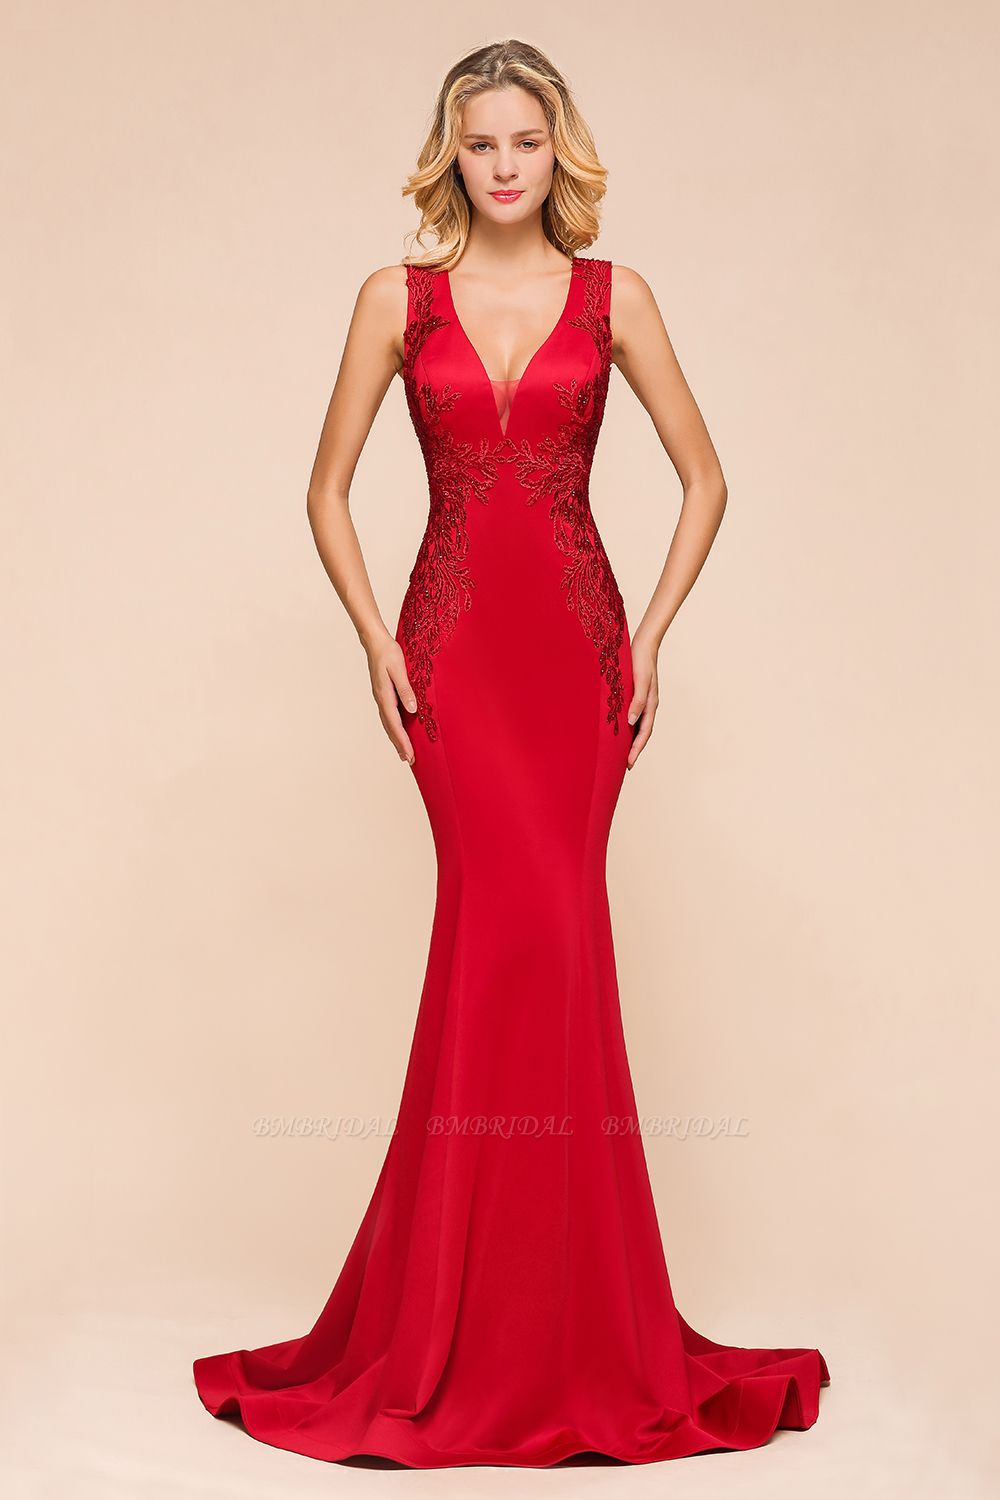 BMbridal Gorgeous Red Mermaid V-Neck Prom Dress Long With Lace Appliques Online